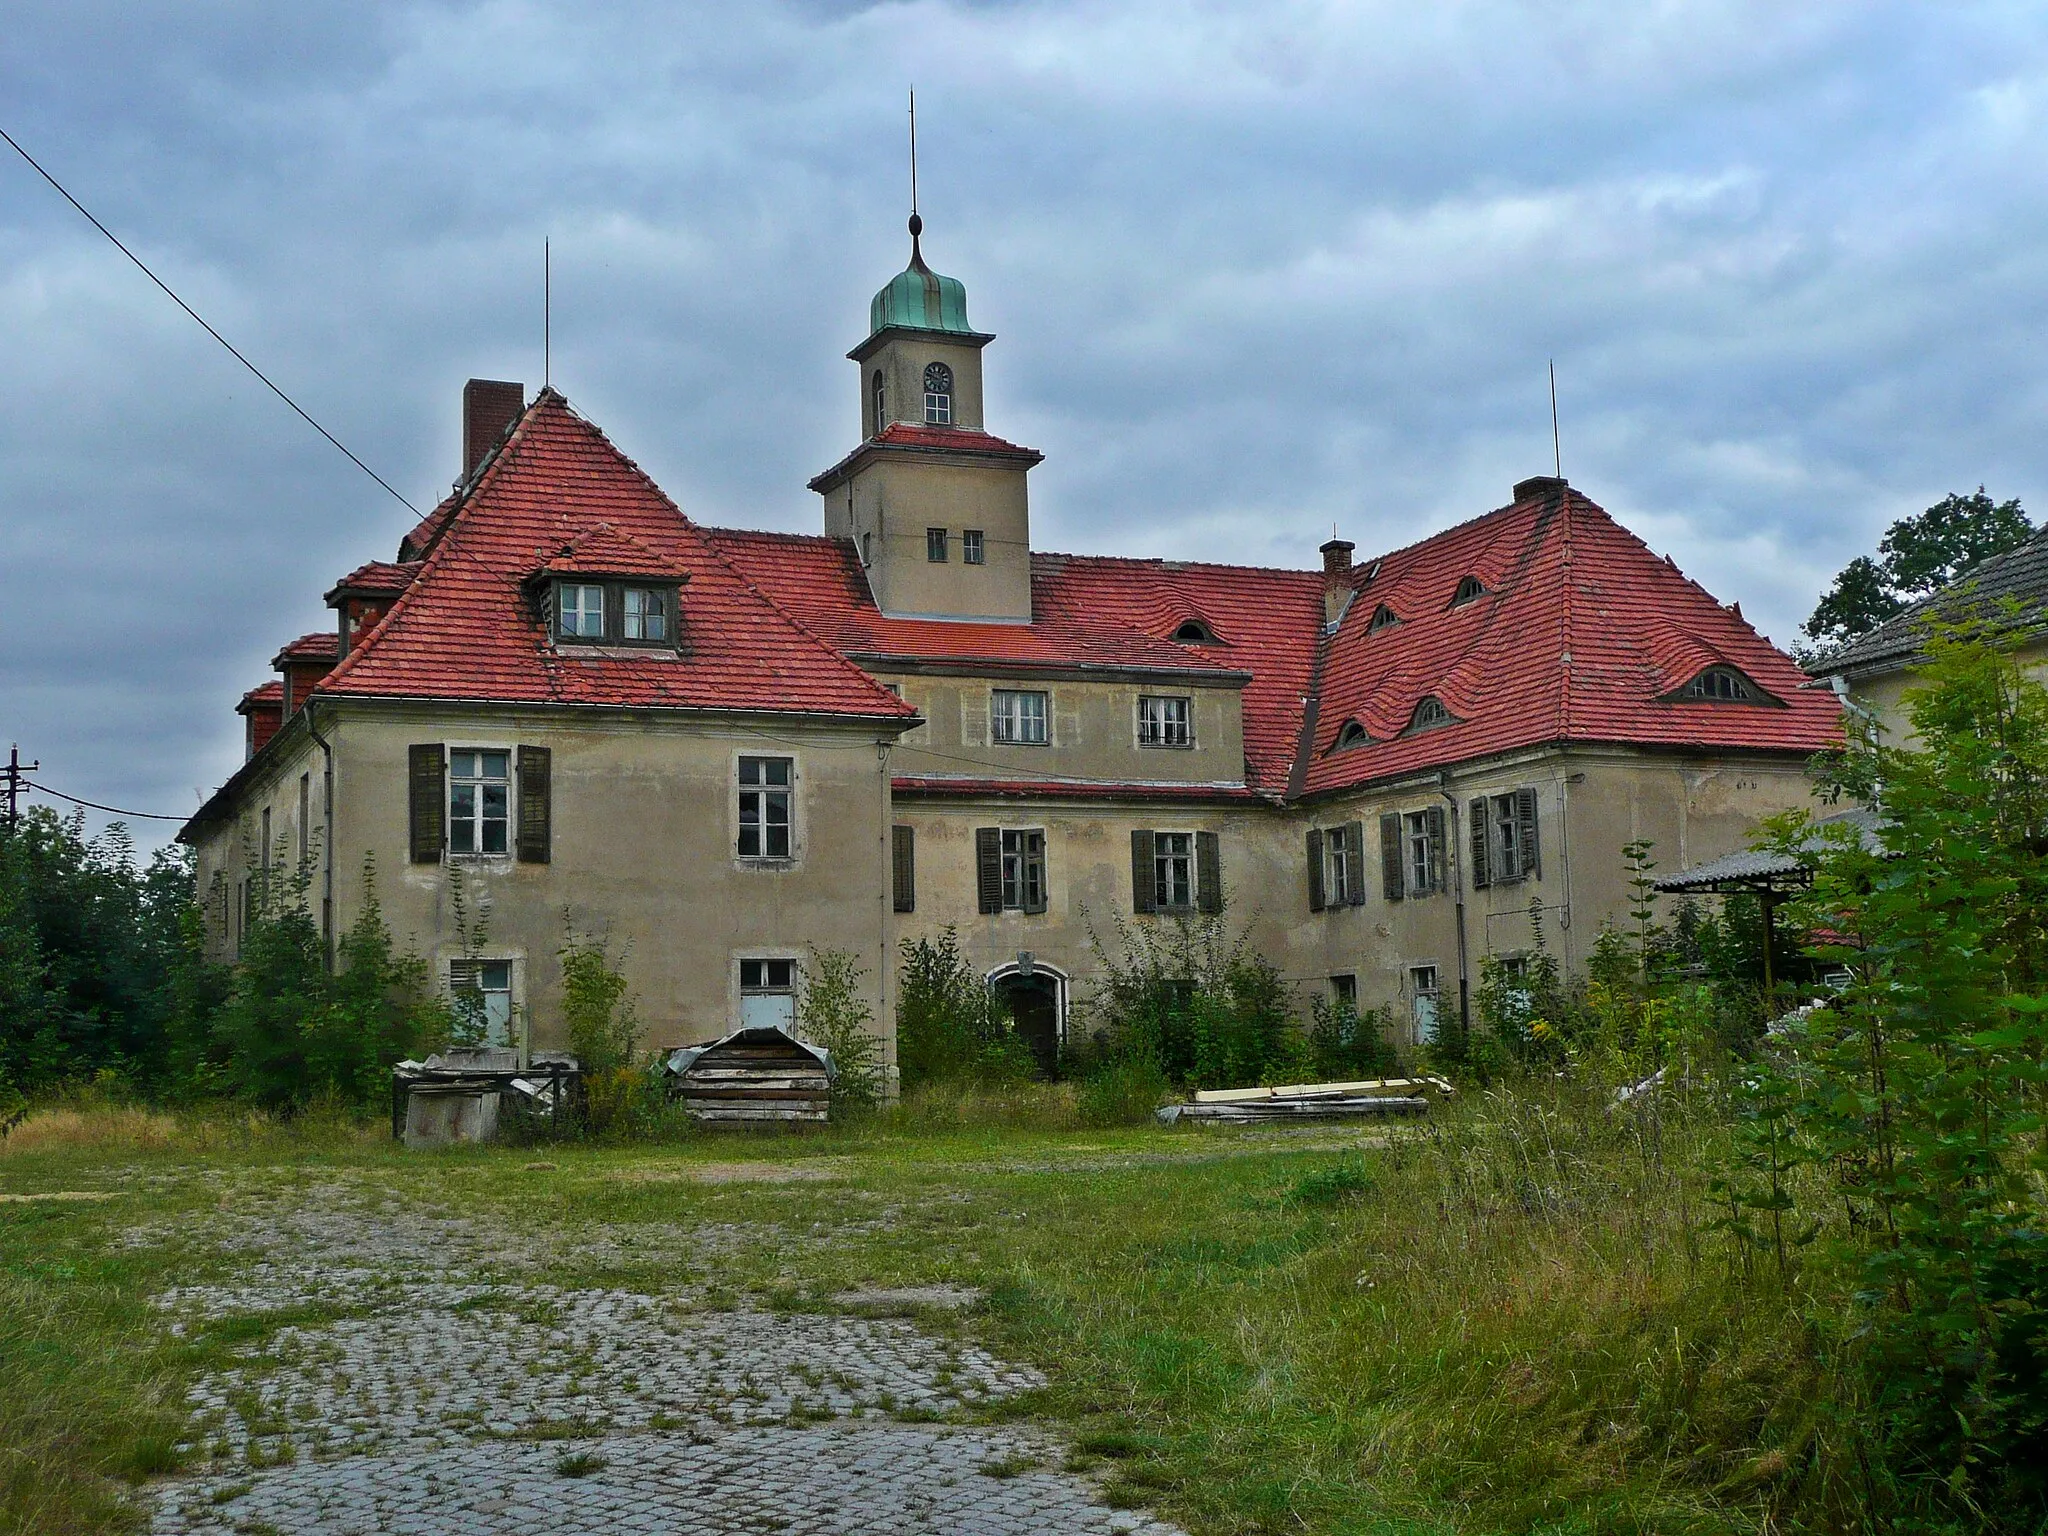 Photo showing: This image shows the manor house (built 1742) in Rennersdorf-Neudörfel near Stolpen in Saxony.